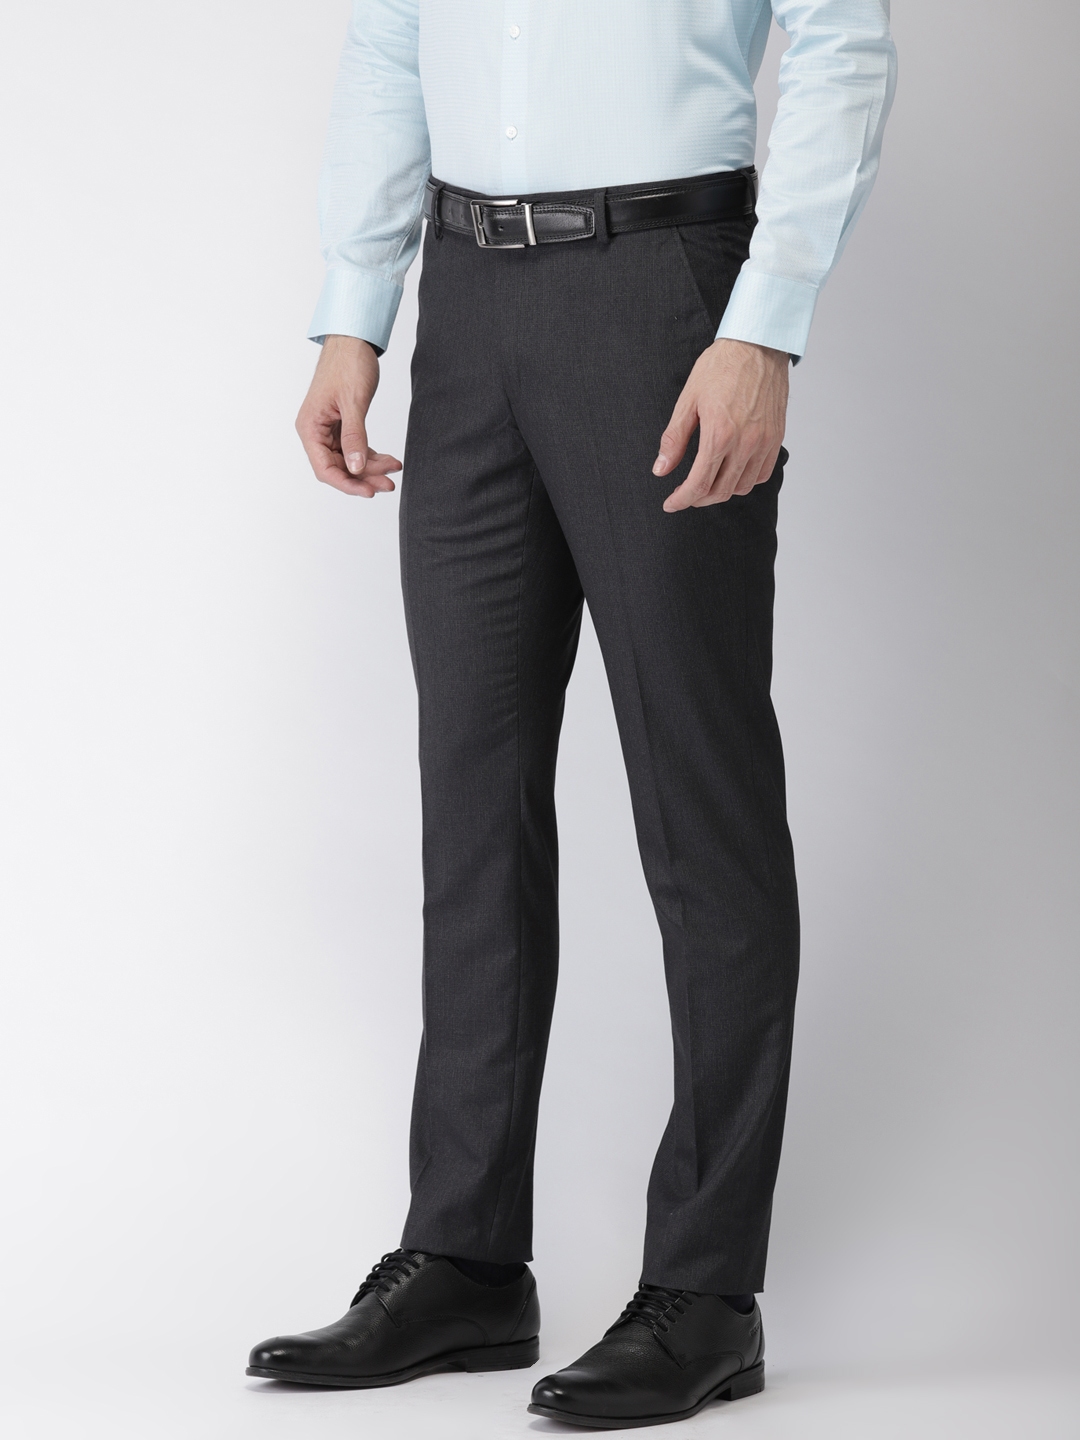 Buy Black Coffee Men Charcoal Grey Solid Formal Trousers ...